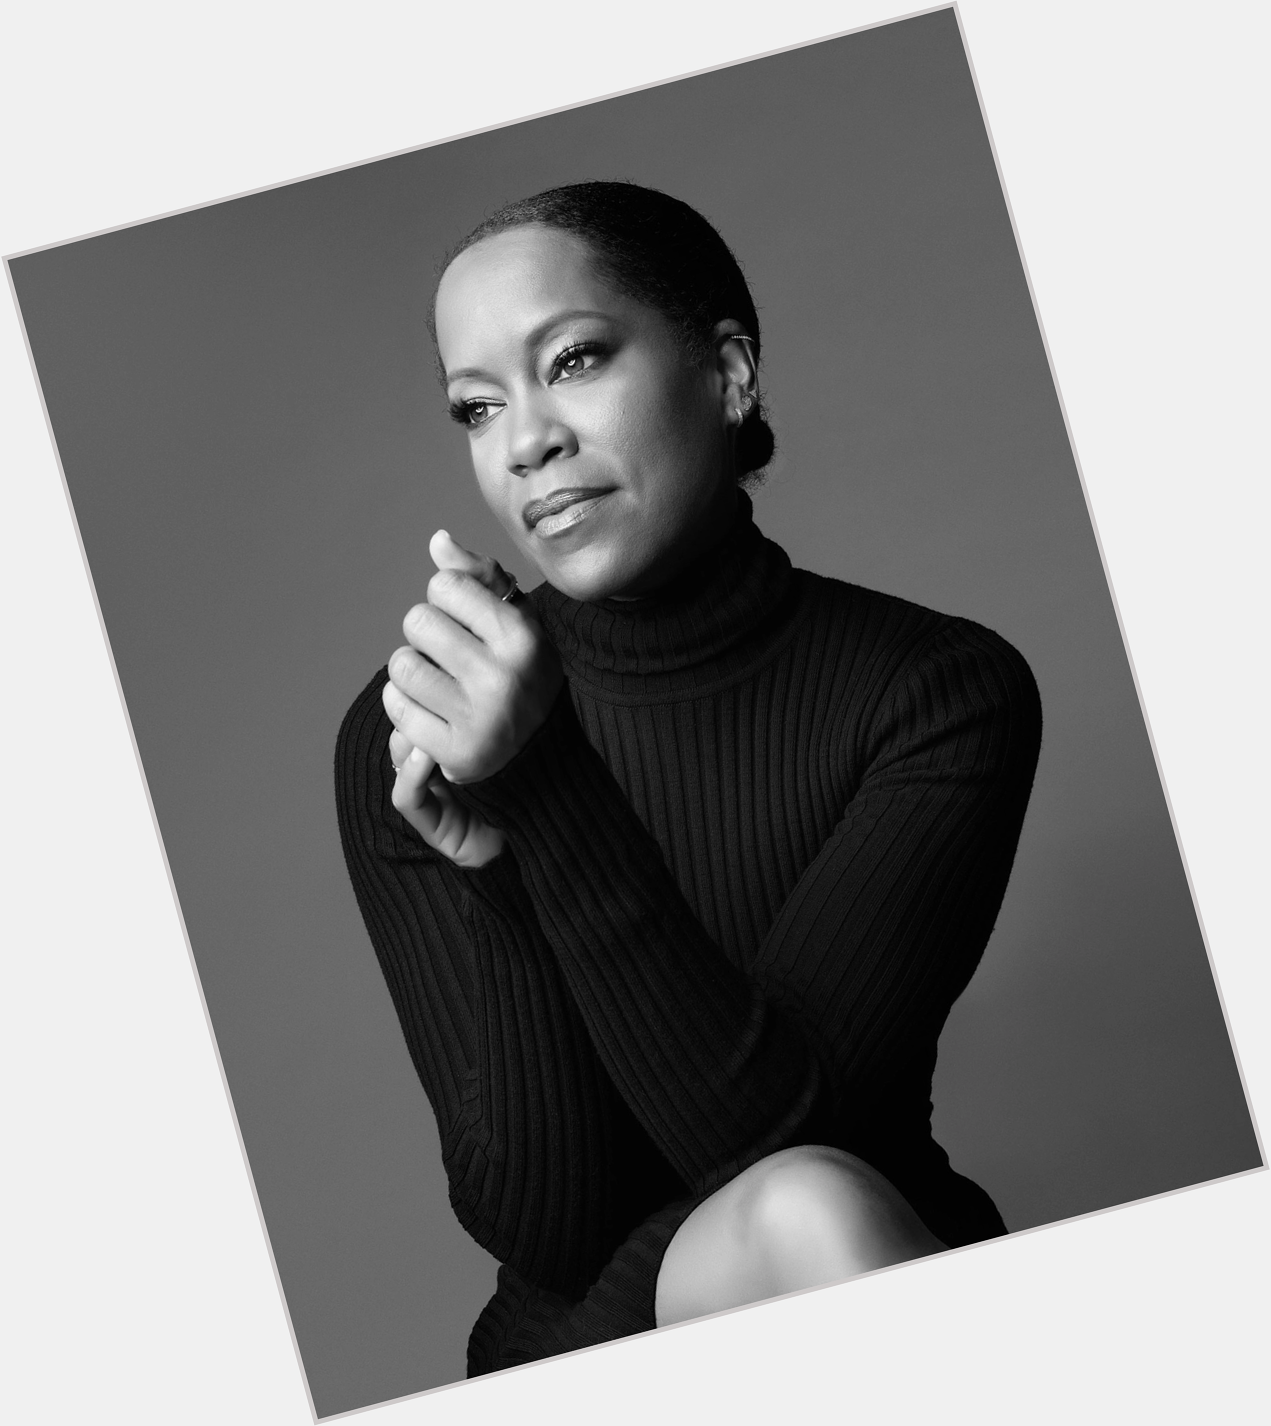 Happy Birthday Regina King!
The Walker Collective - A Law Firm For Creatives
 